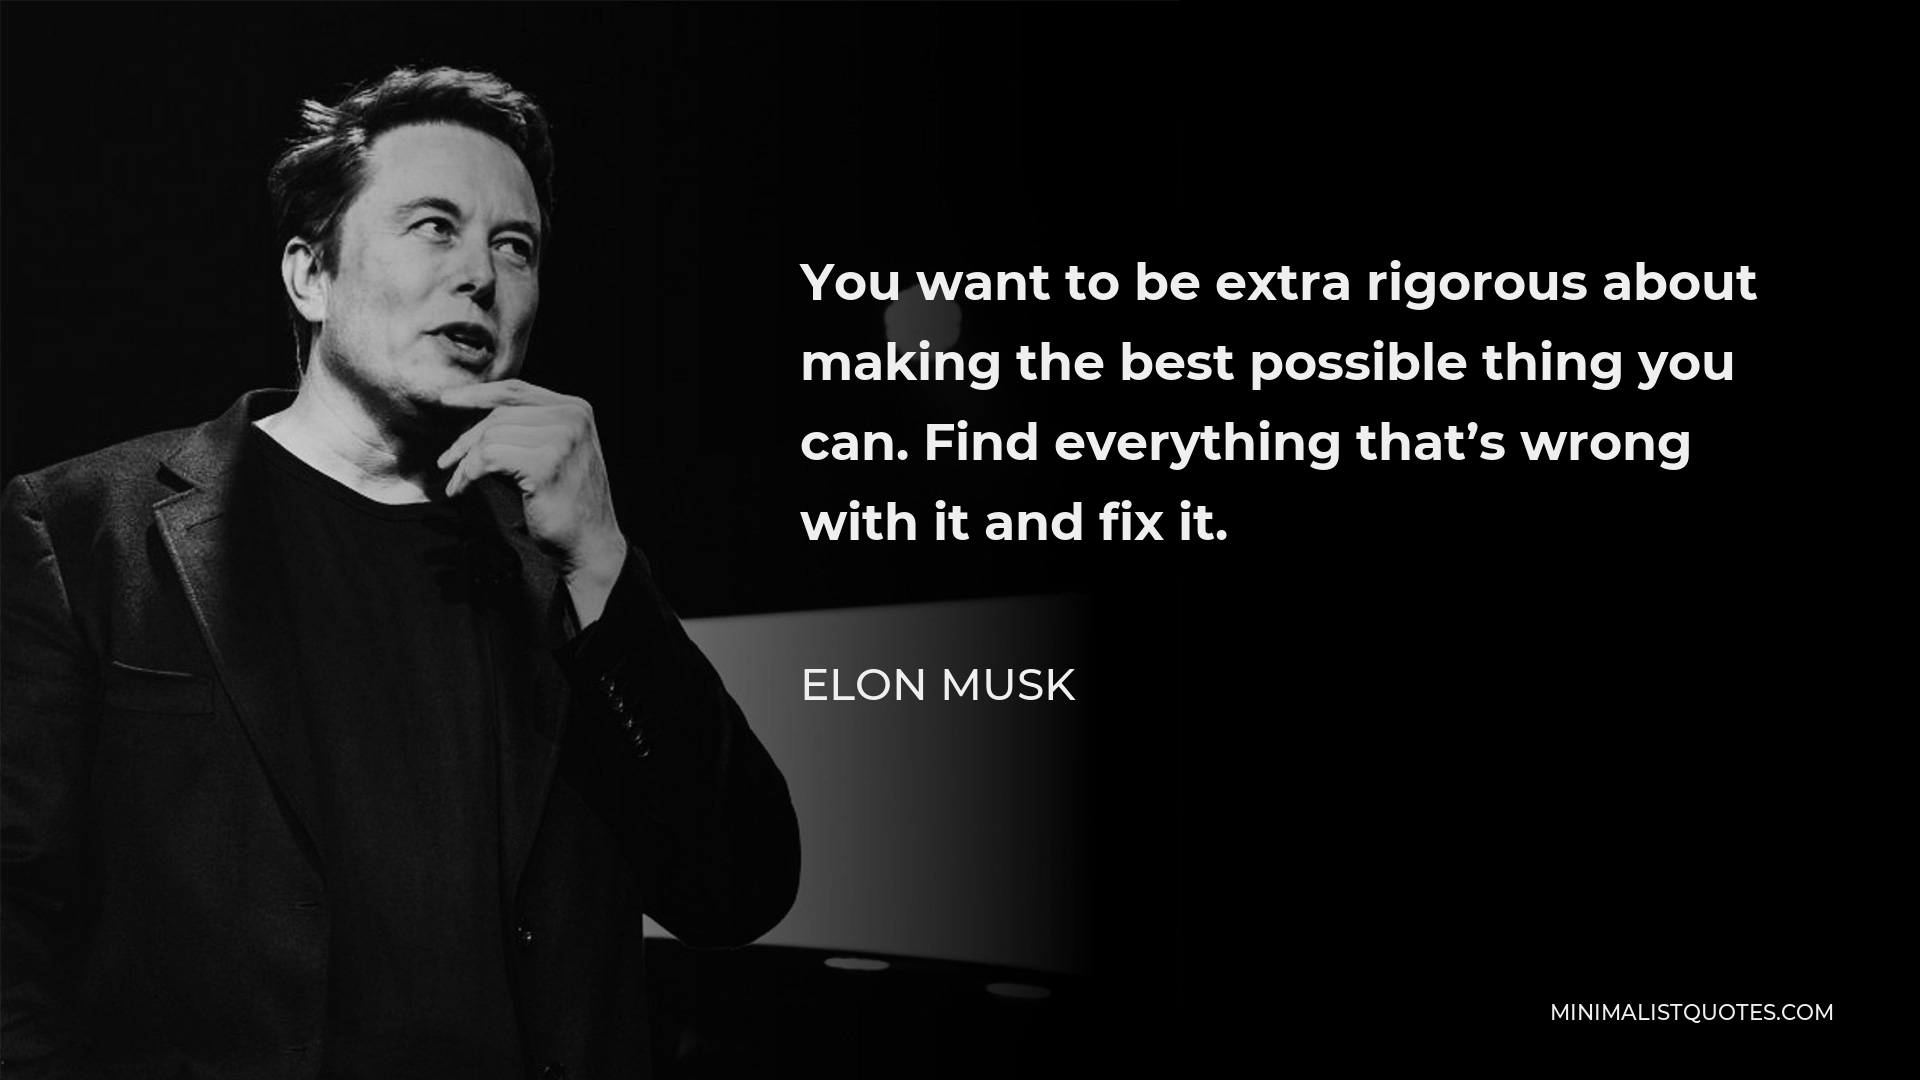 Elon Musk Quote - You want to be extra rigorous about making the best possible thing you can. Find everything that’s wrong with it and fix it.